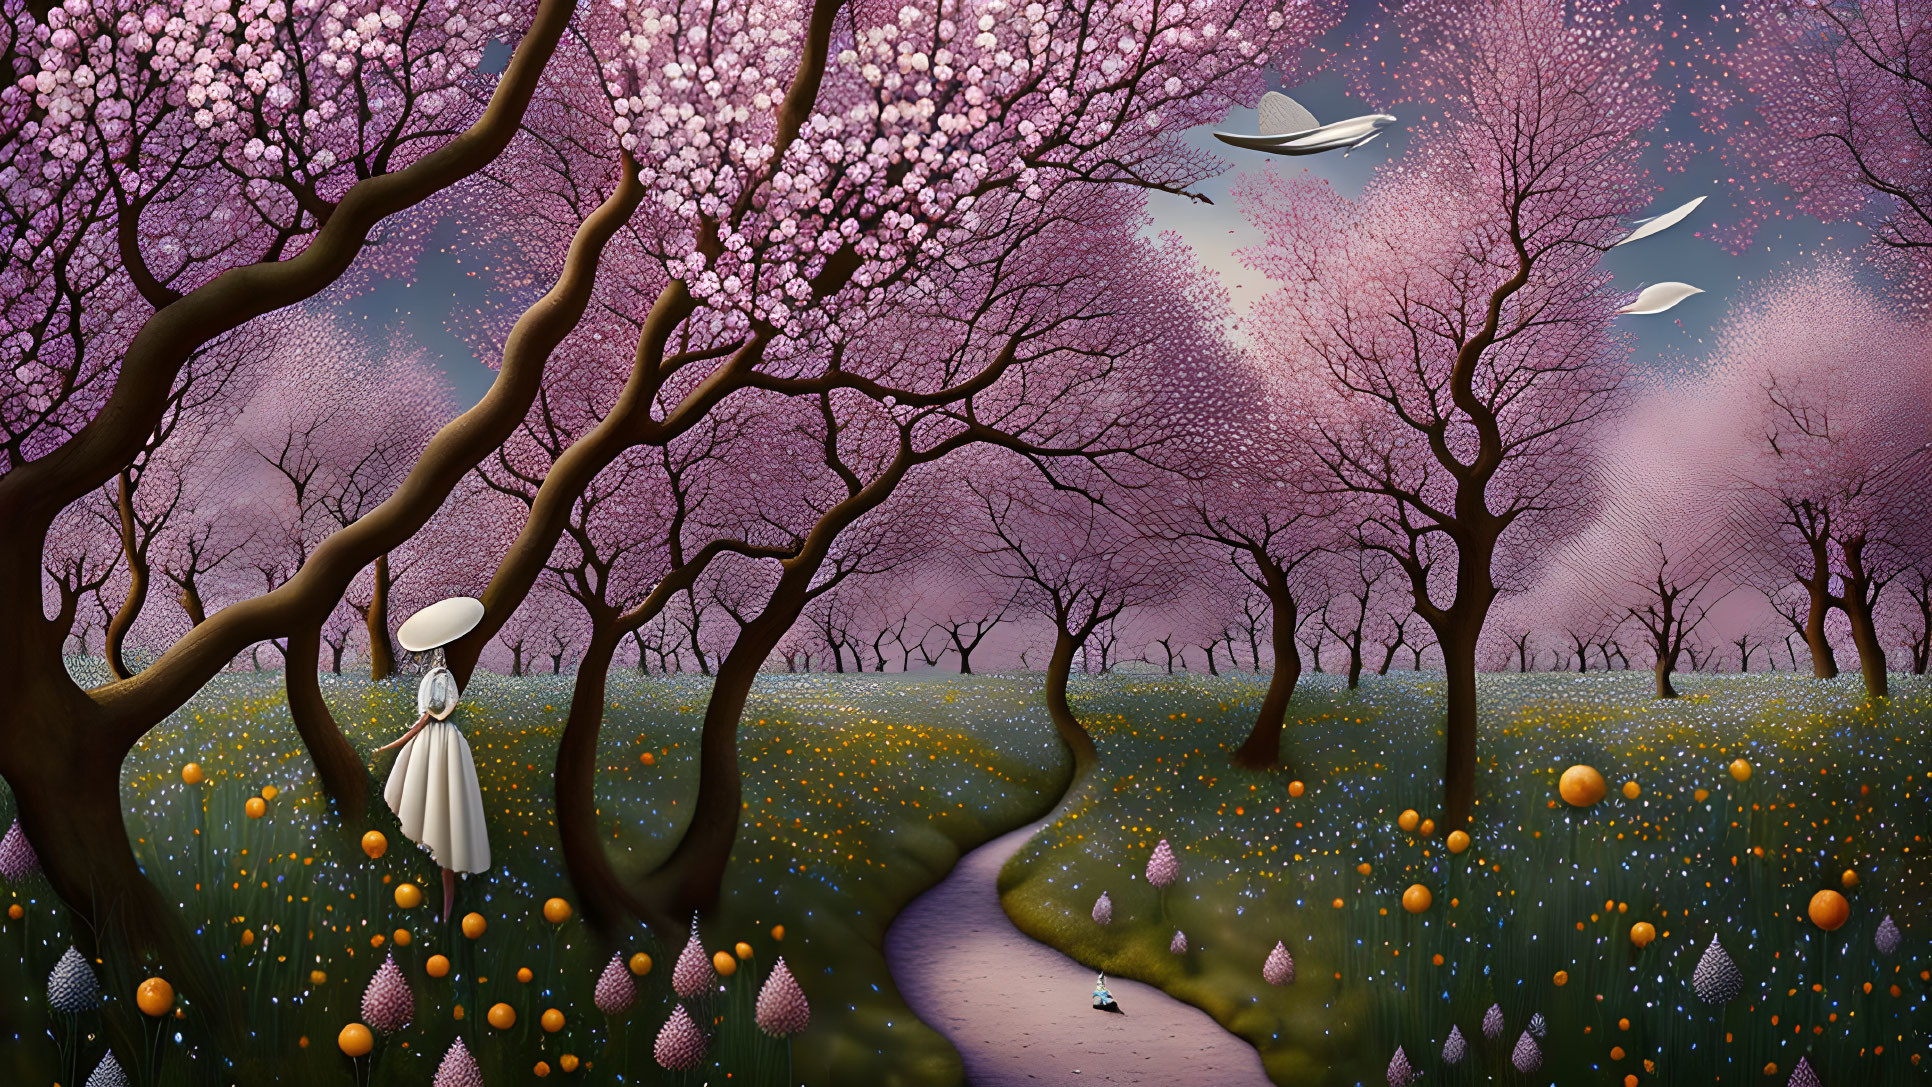 Woman in White Dress and Hat Among Cherry Blossom Trees